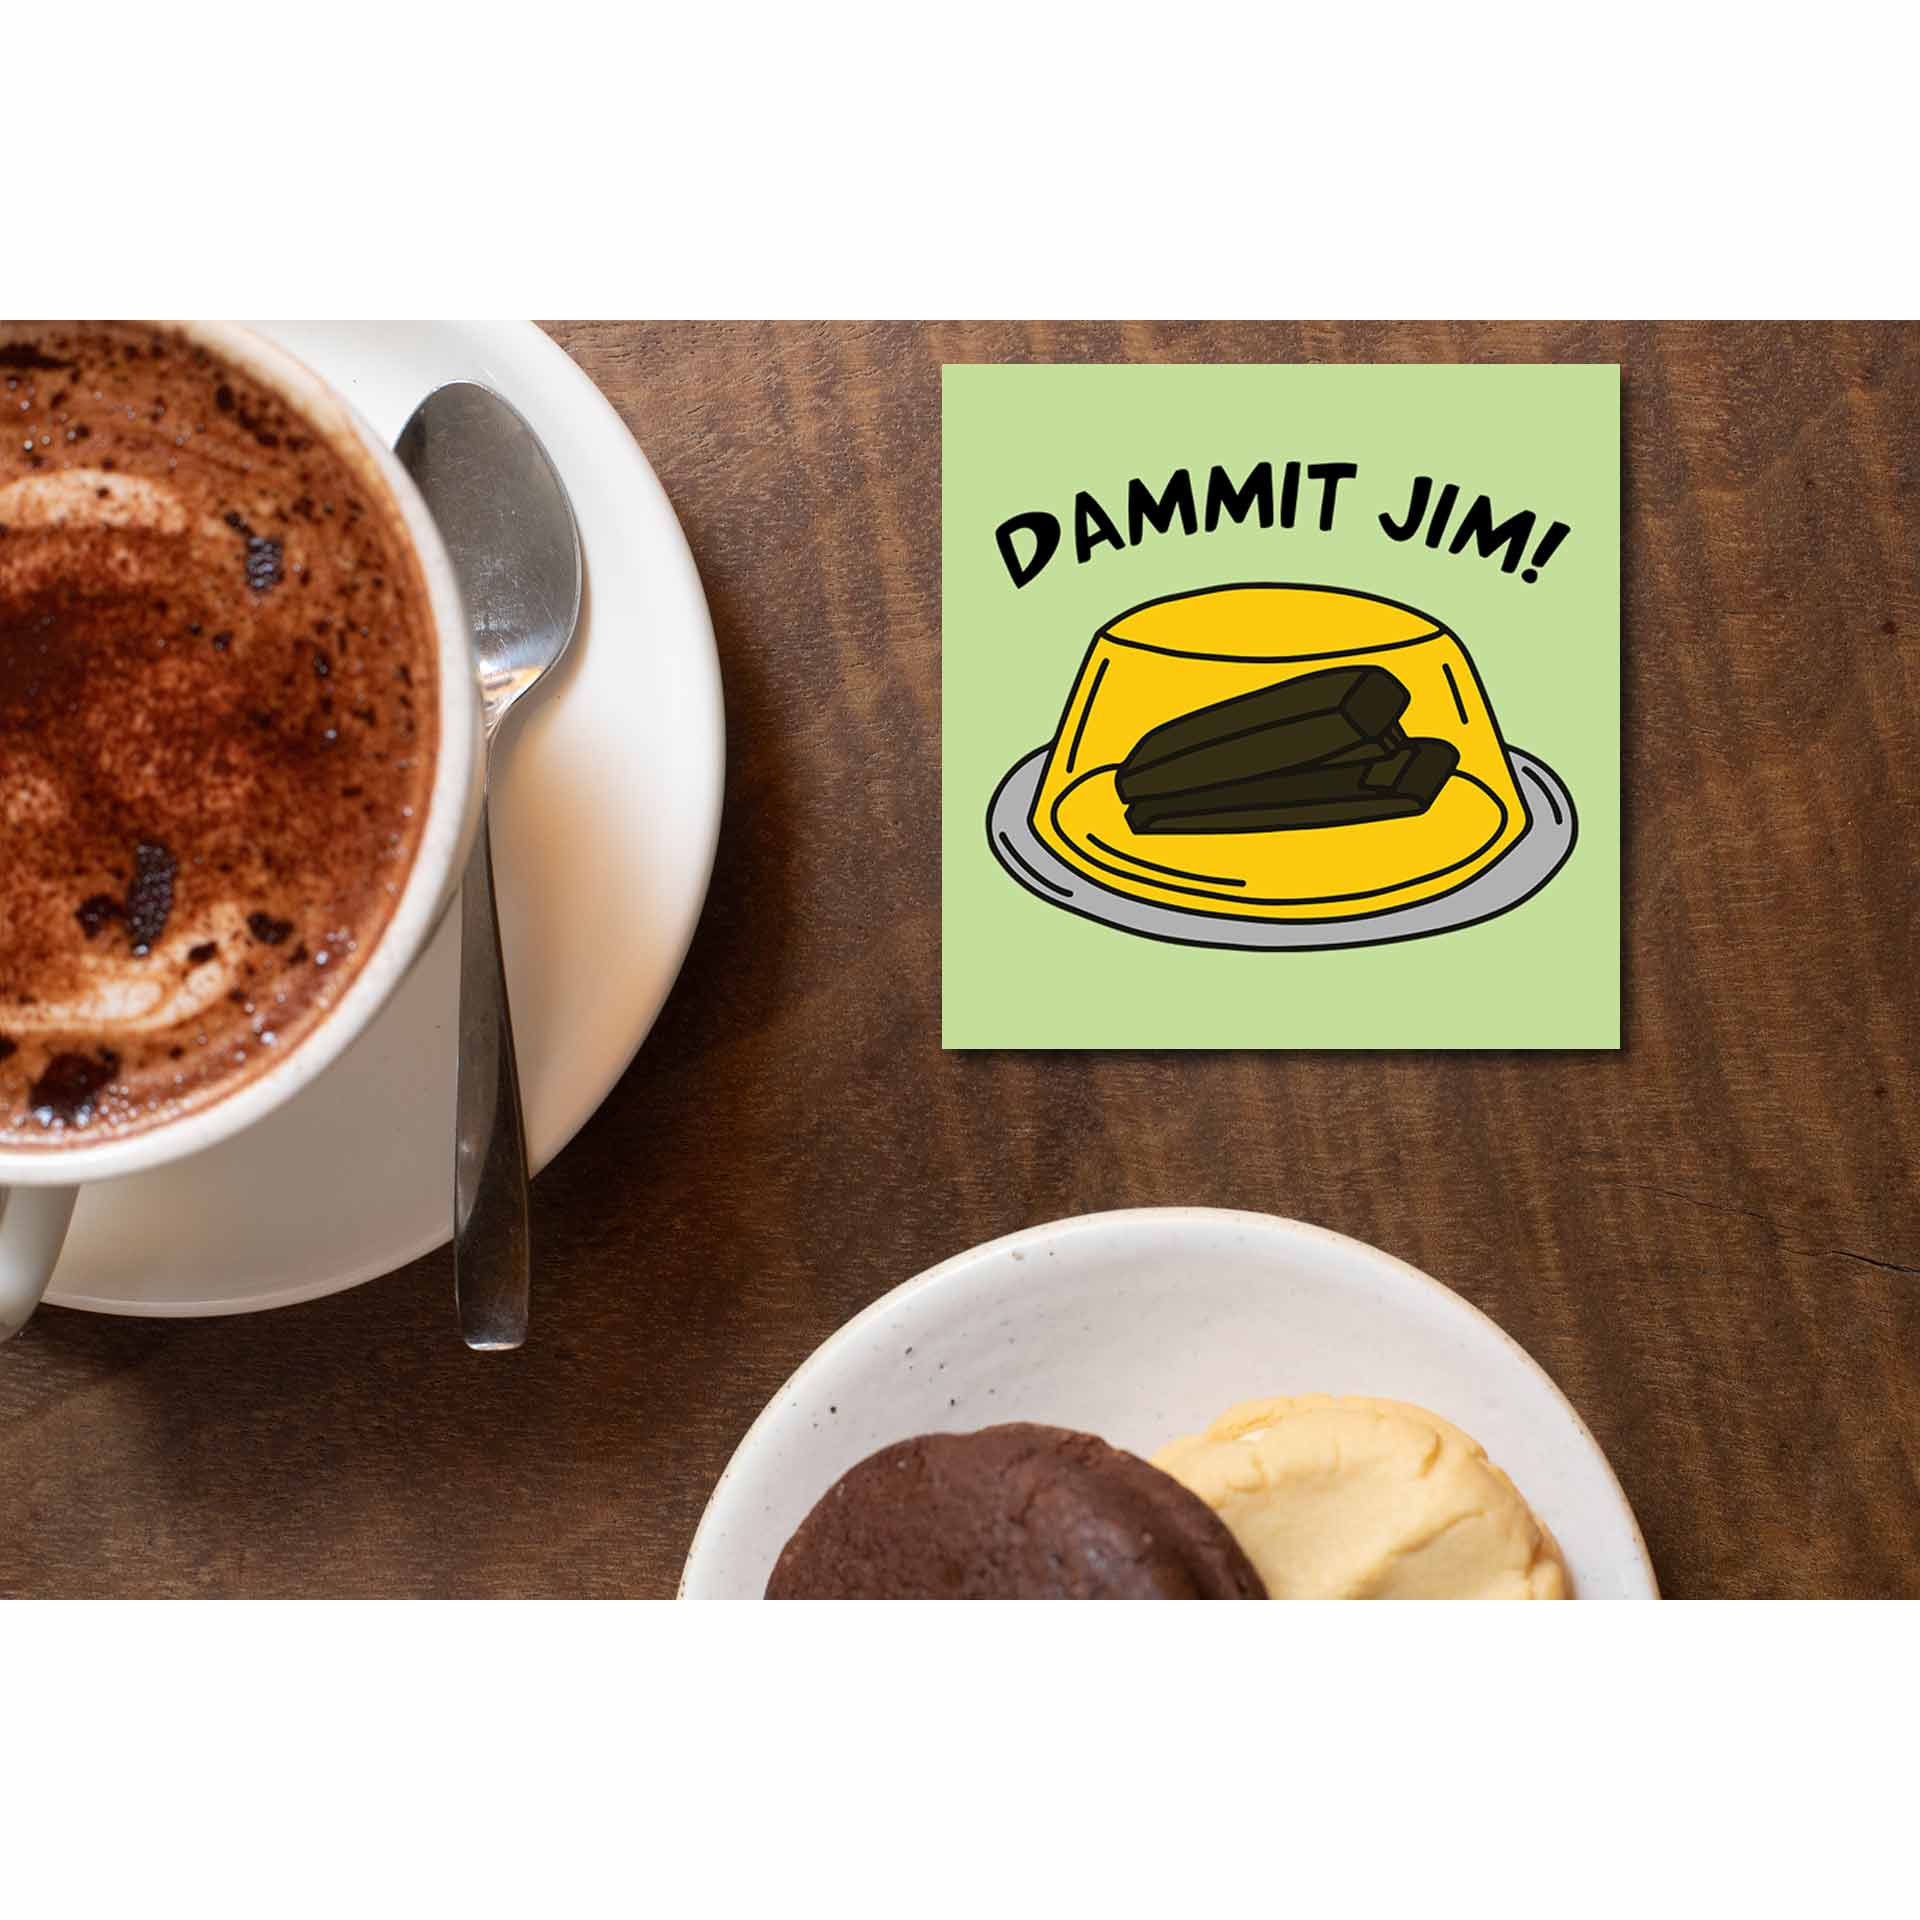 the office dammit jim coasters wooden table cups indian tv & movies buy online india the banyan tee tbt men women girls boys unisex